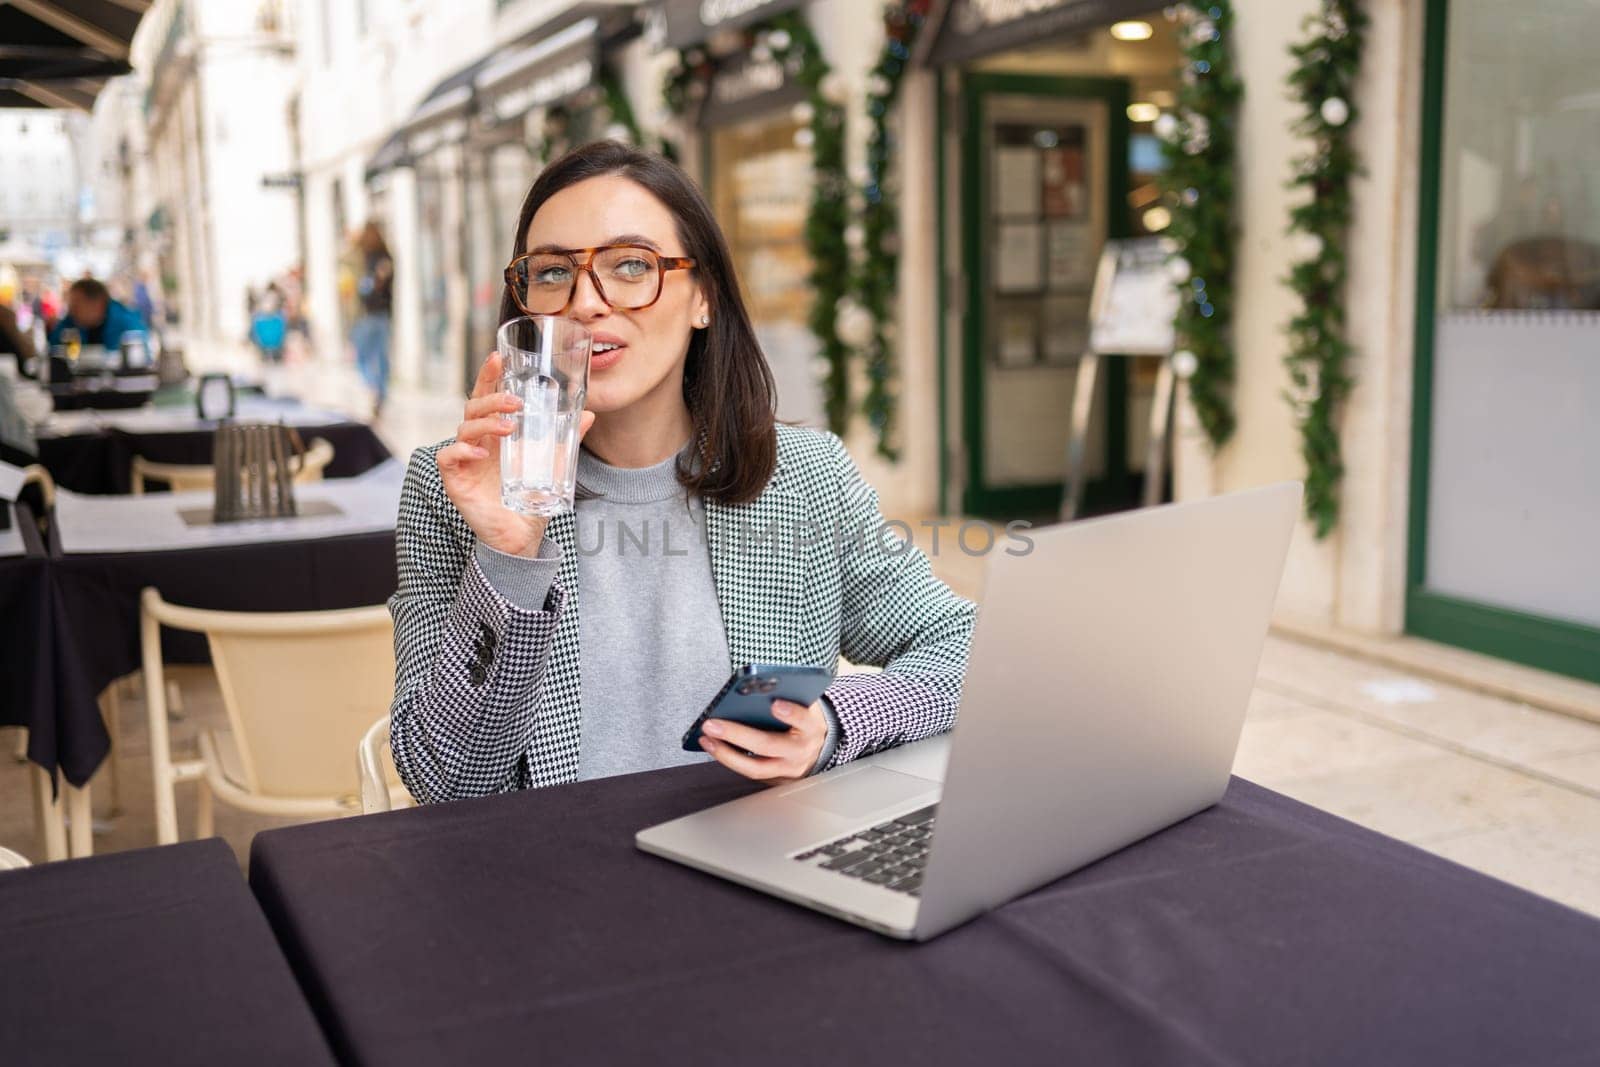 Portrait of attractive delighted charming smiling woman freelancer or student wearing glasses, working in cafe on laptop, holding mobile phone in hands, drinking water from glass.